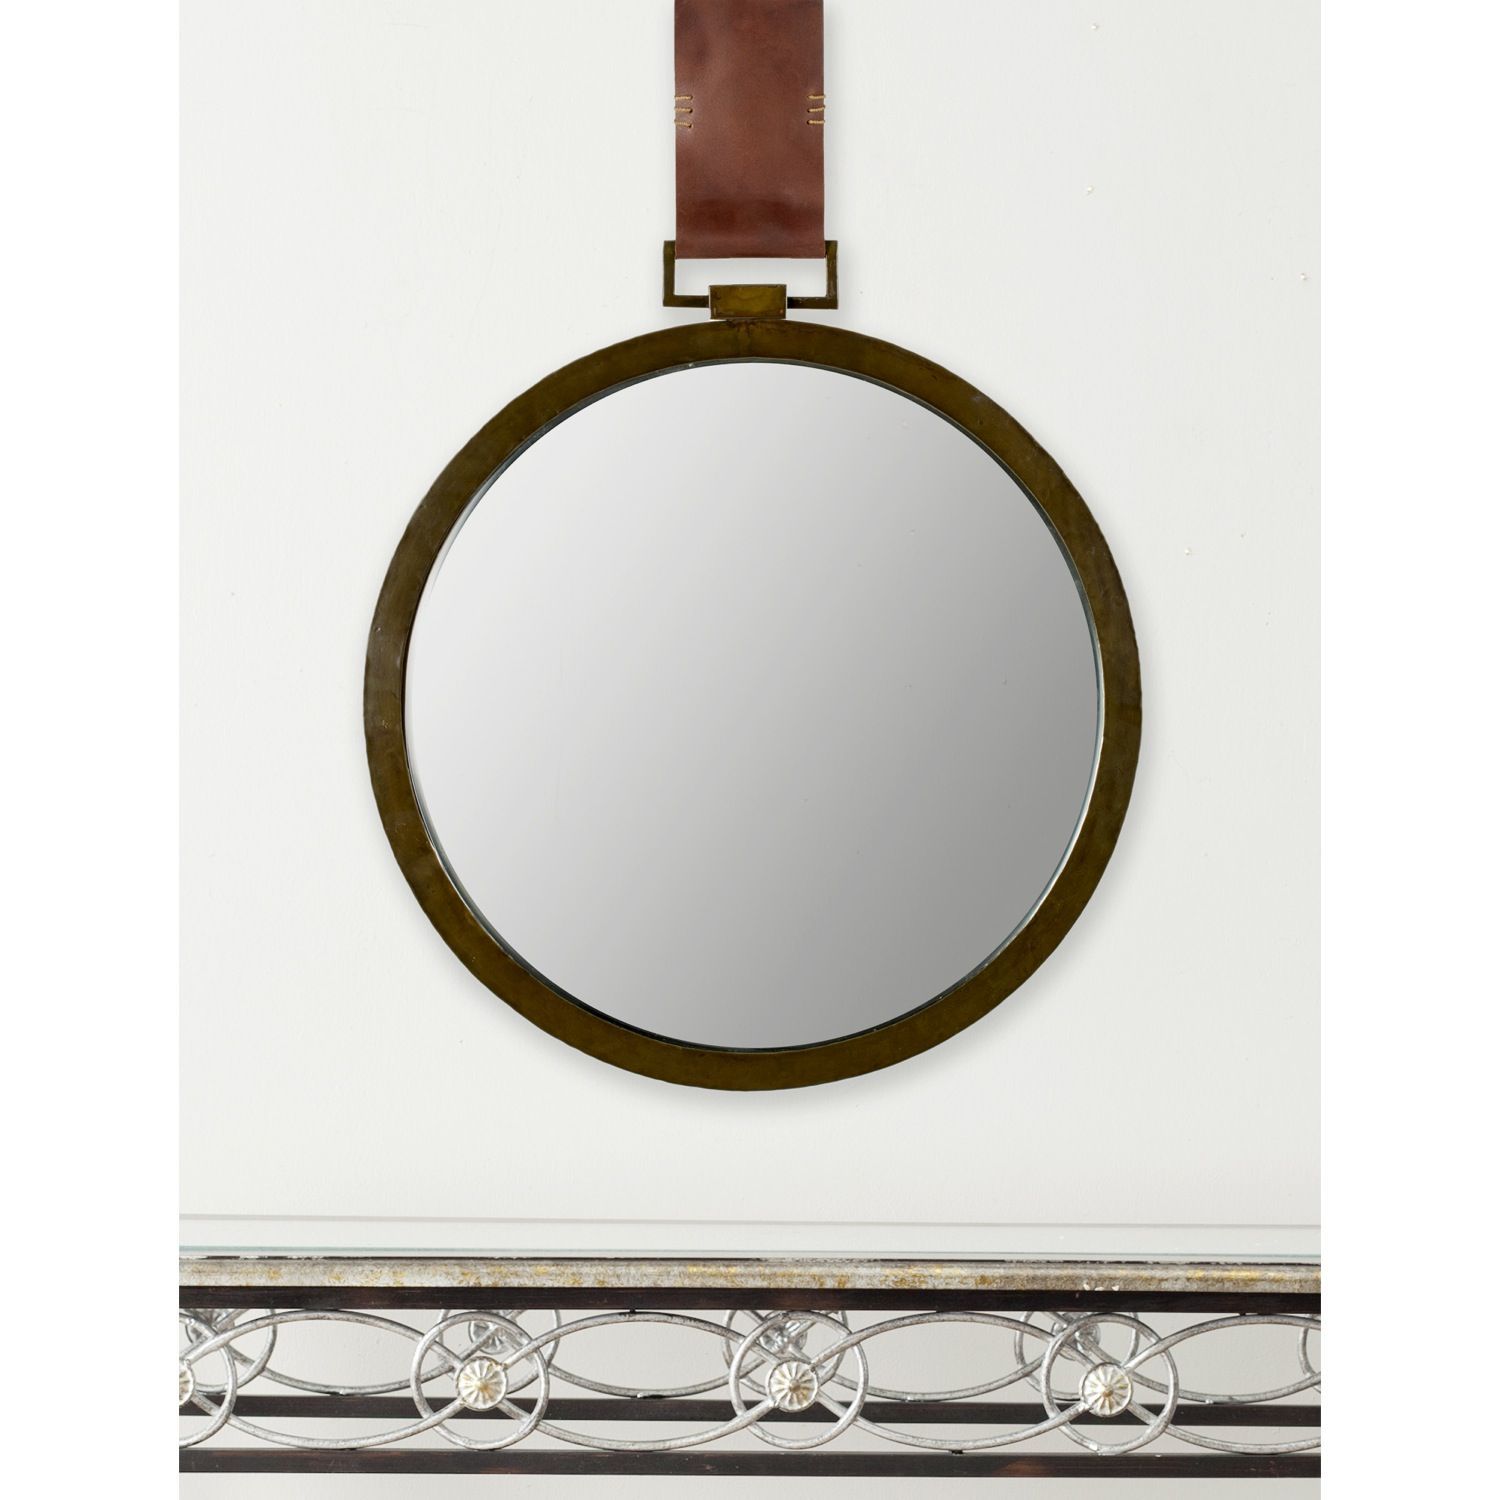 Mirrors | Mirrors With Leather Straps, Round Mirror Decor, Mirror Frames Intended For Brown Leather Round Wall Mirrors (Photo 2 of 15)